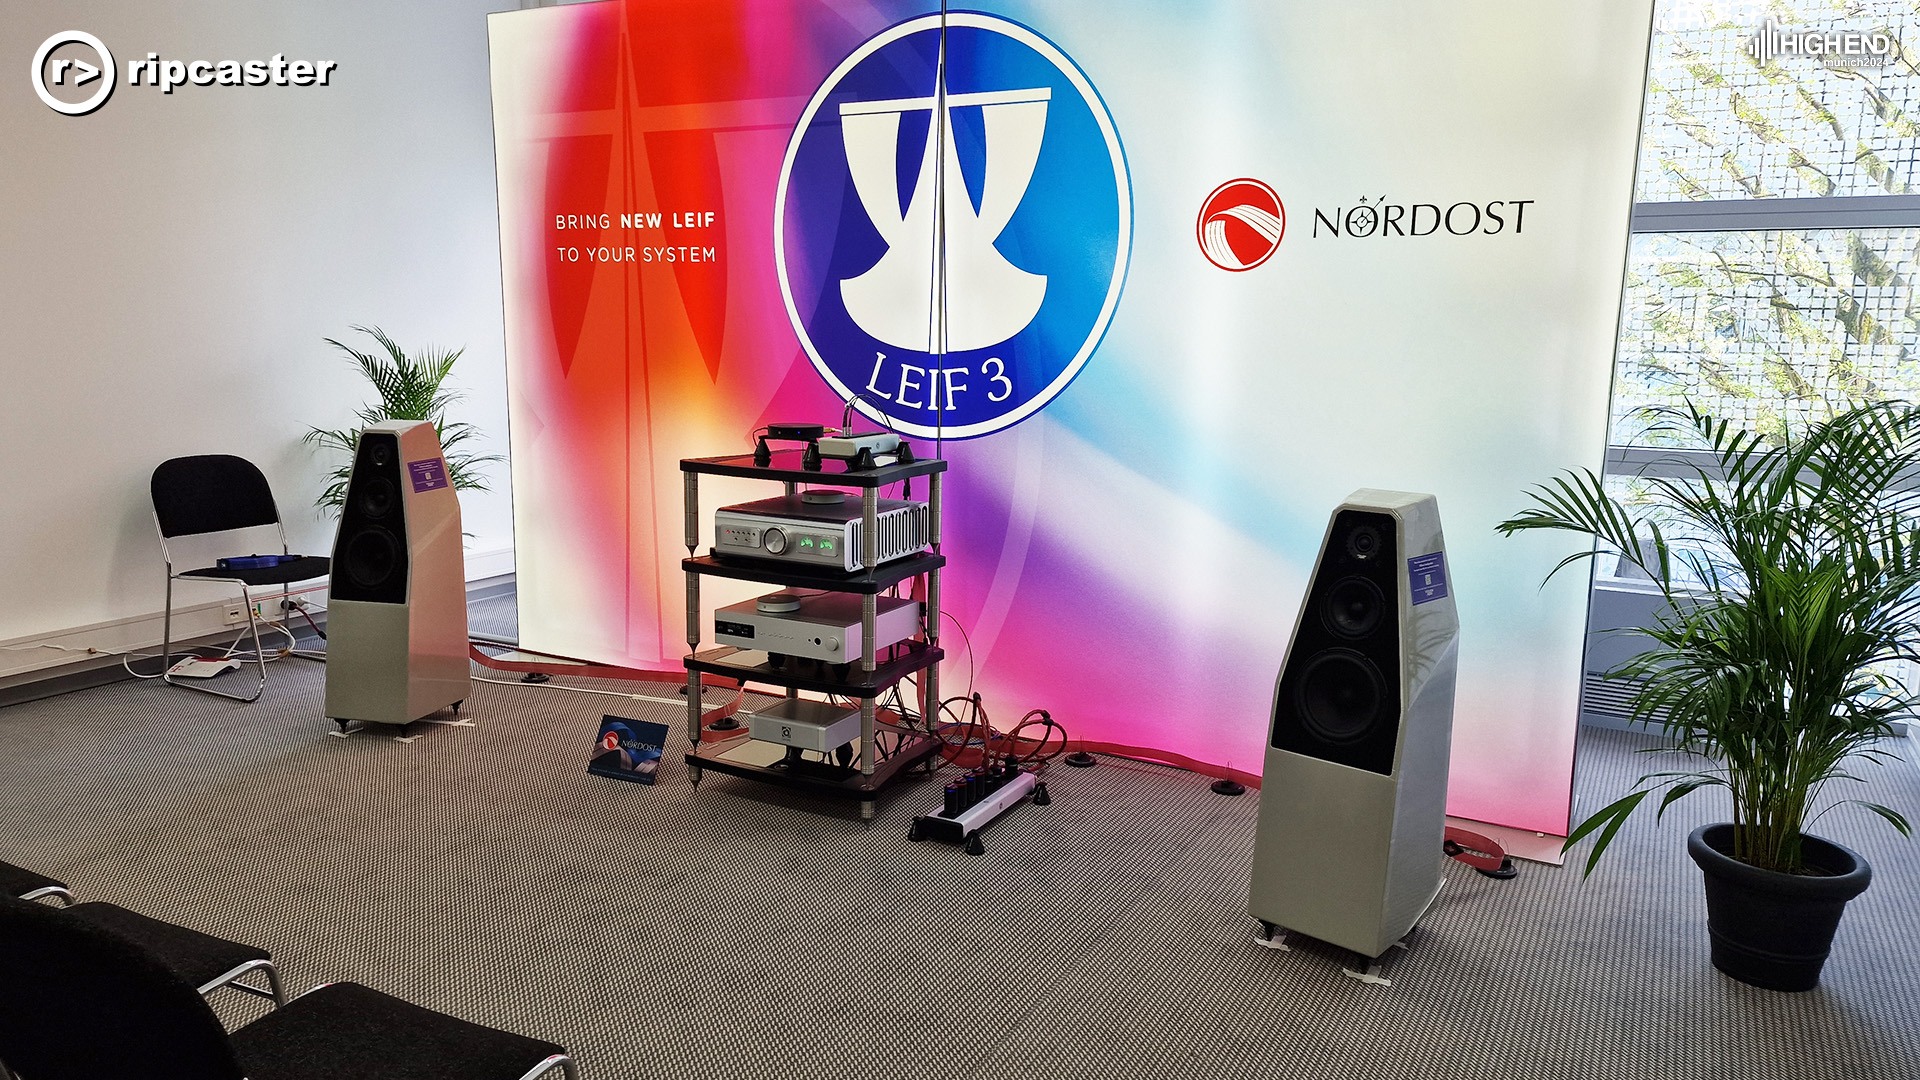 A big Nordost backdrop with a pair of speakers either side of a stack of HiFi equipment.  There are chairs visible in the foreground on the left